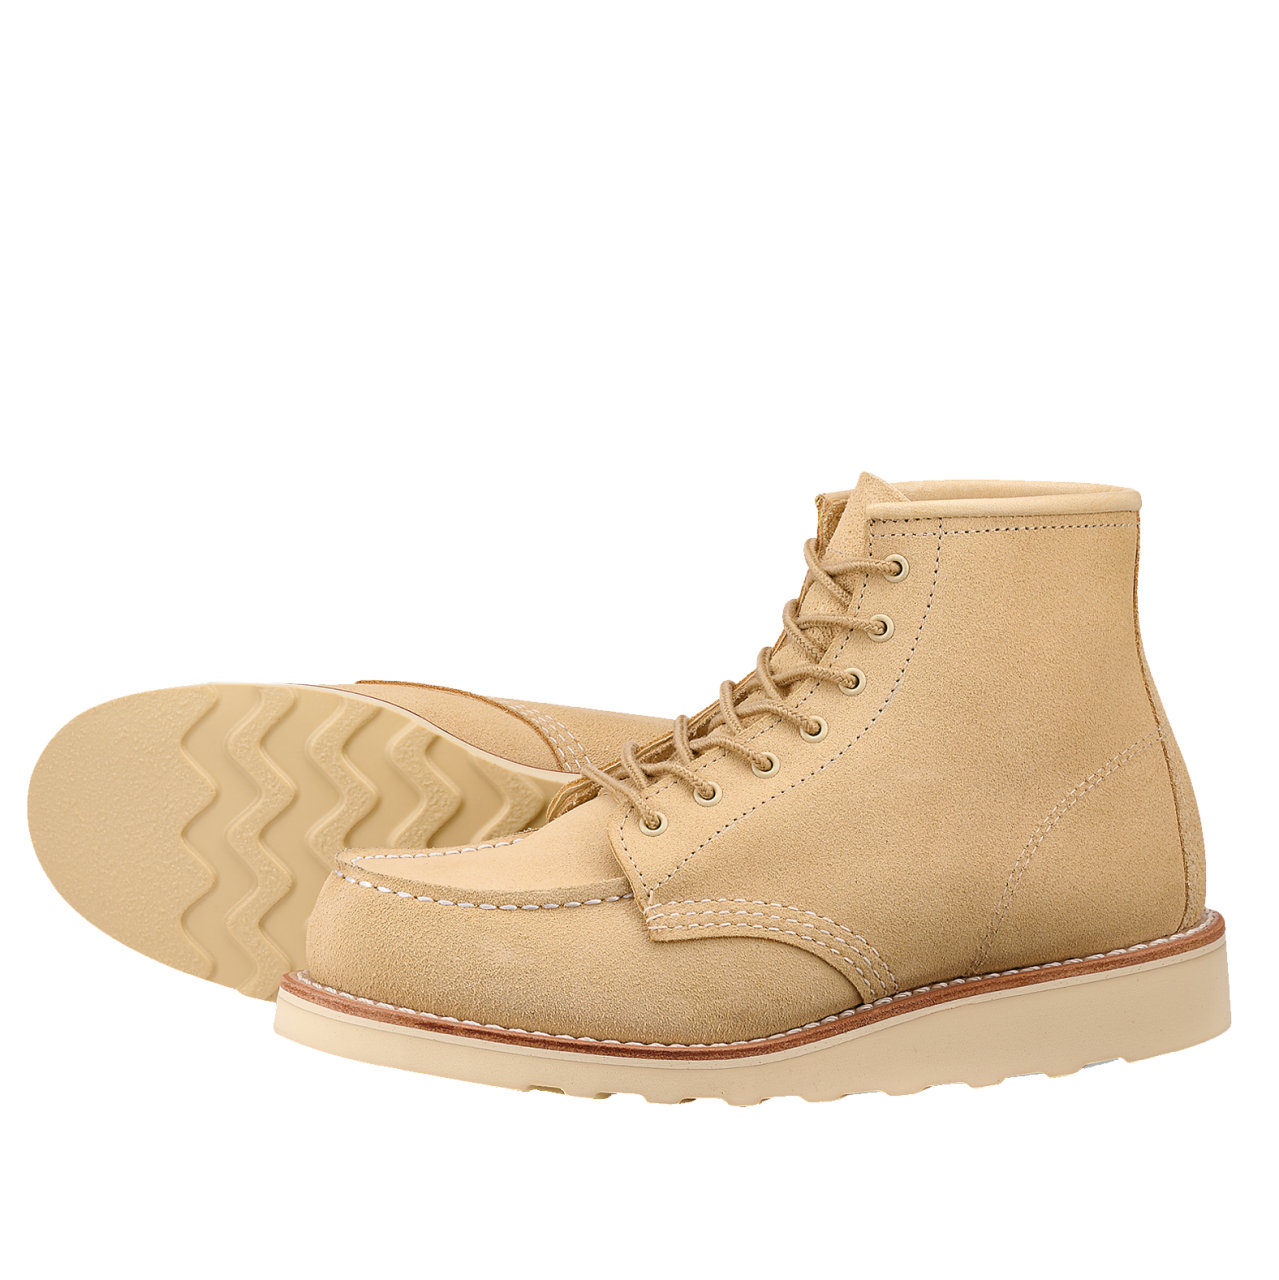 Red Wing 3328 Moc Toe